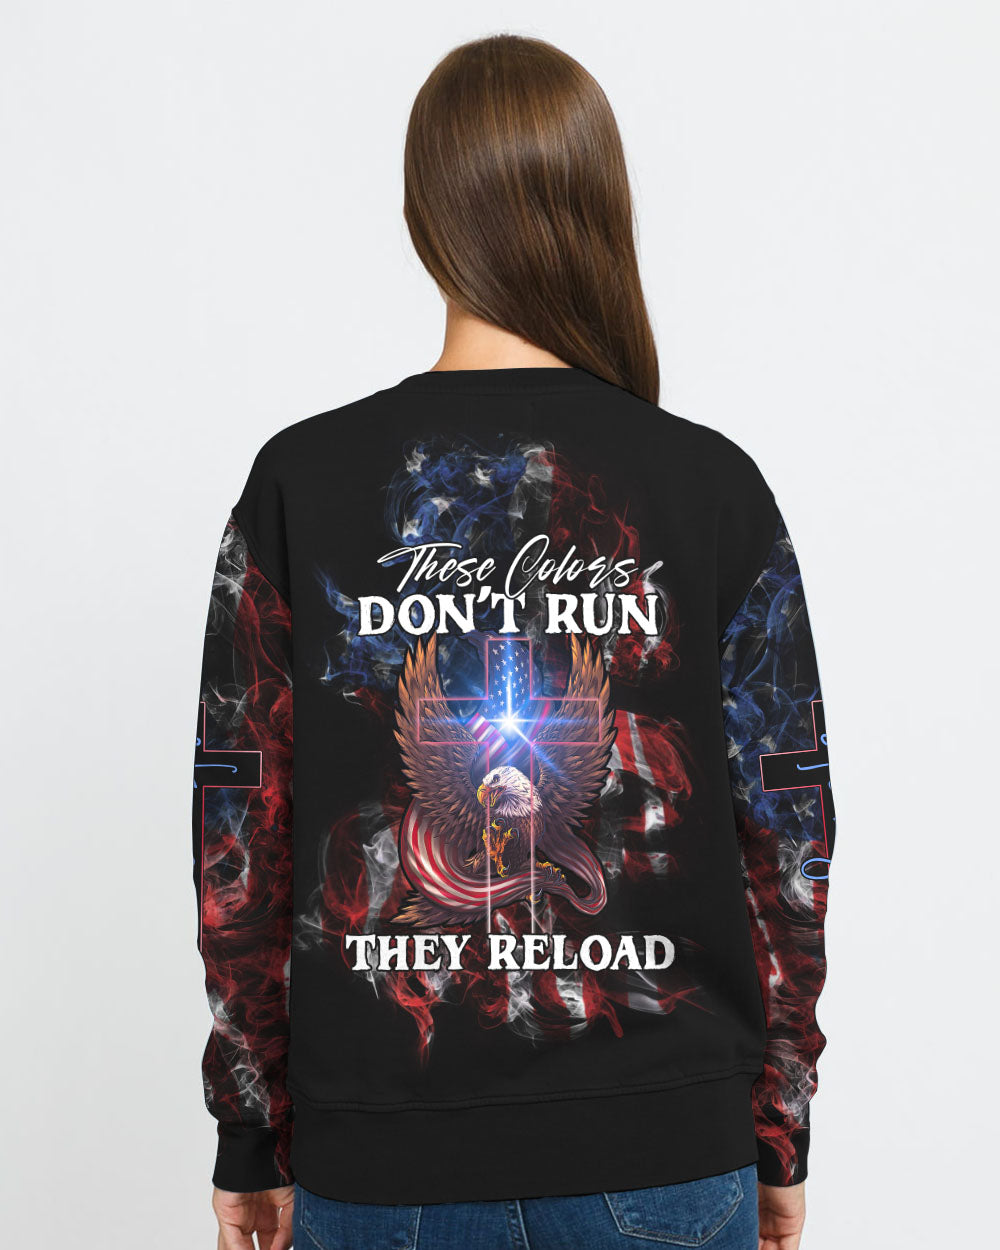 These Colors Don't Run They Reload Eagle Wings Cross Flag Women's Christian Sweatshirt